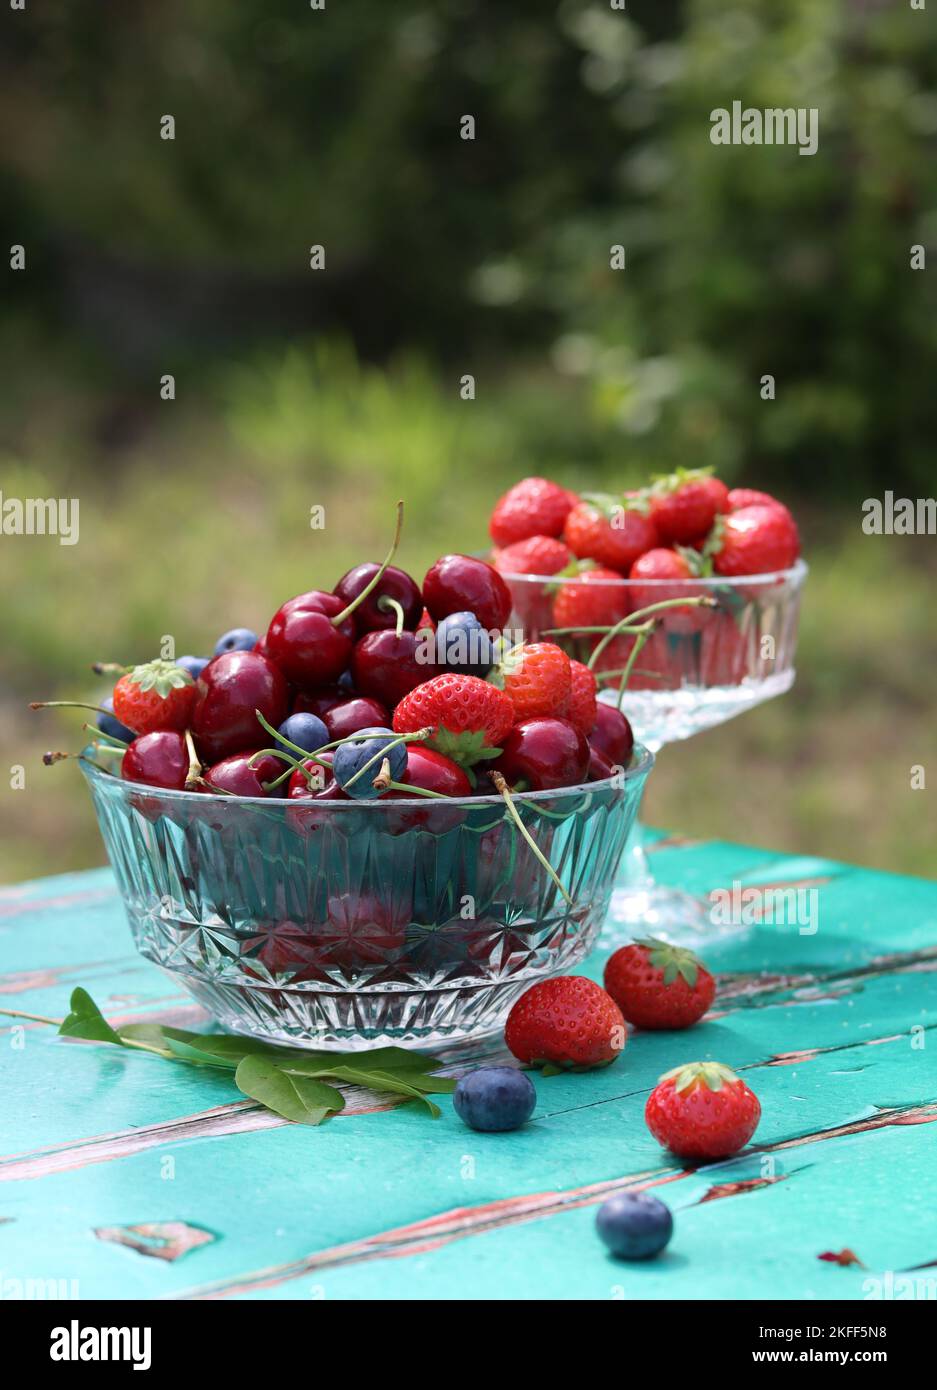 Glass bowl full of juicy organic berries. Summer still life with strawberry, sweet cherry, blueberry. Eating fresh concept. Stock Photo